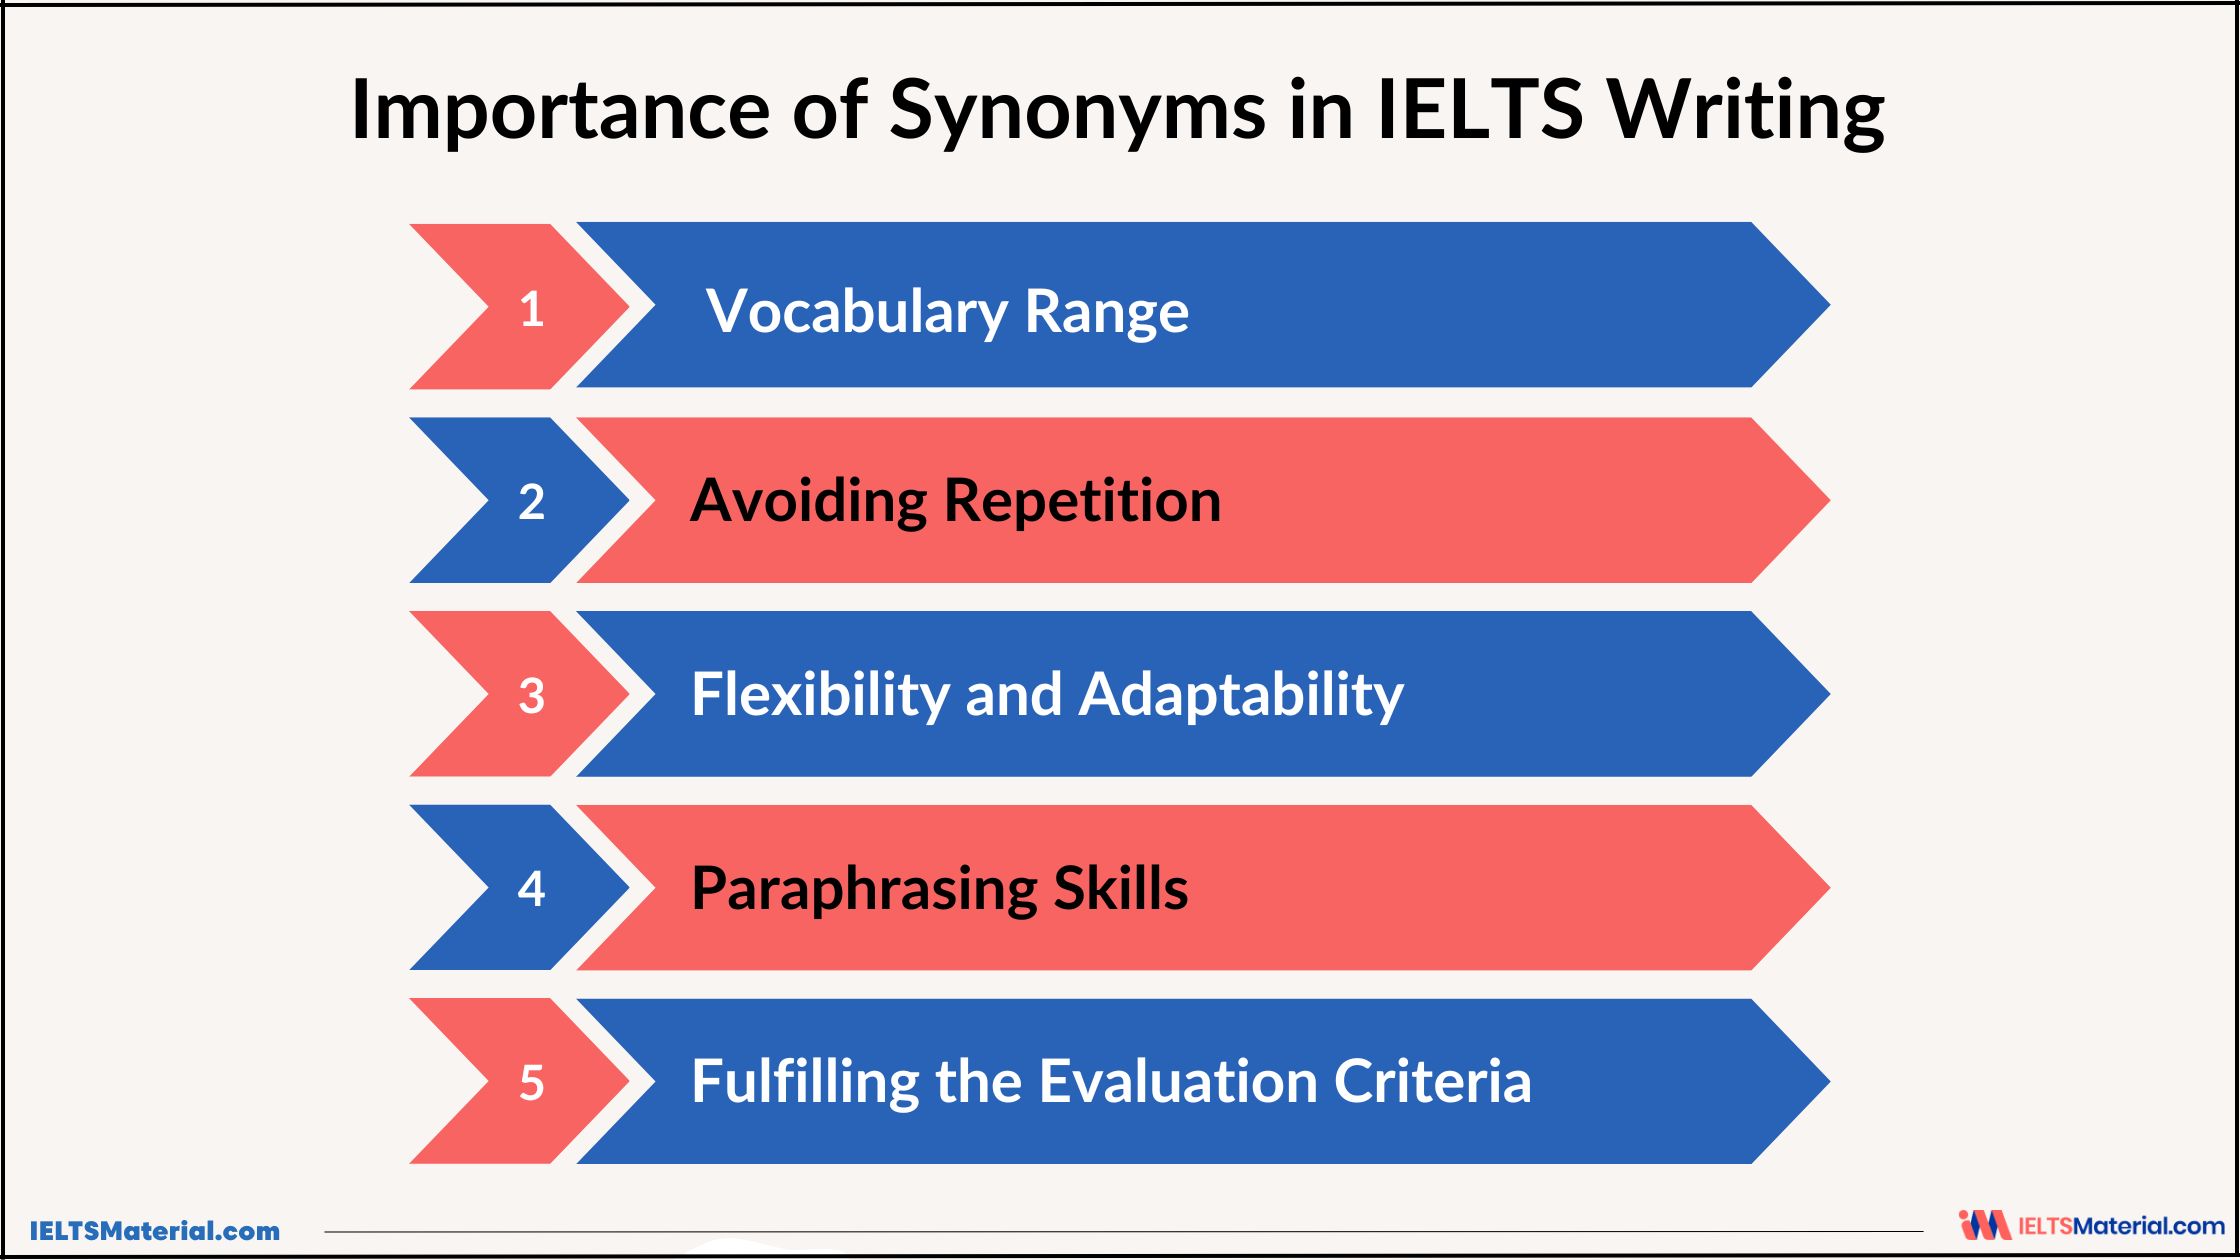 Importance of Synonyms in IELTS Writing